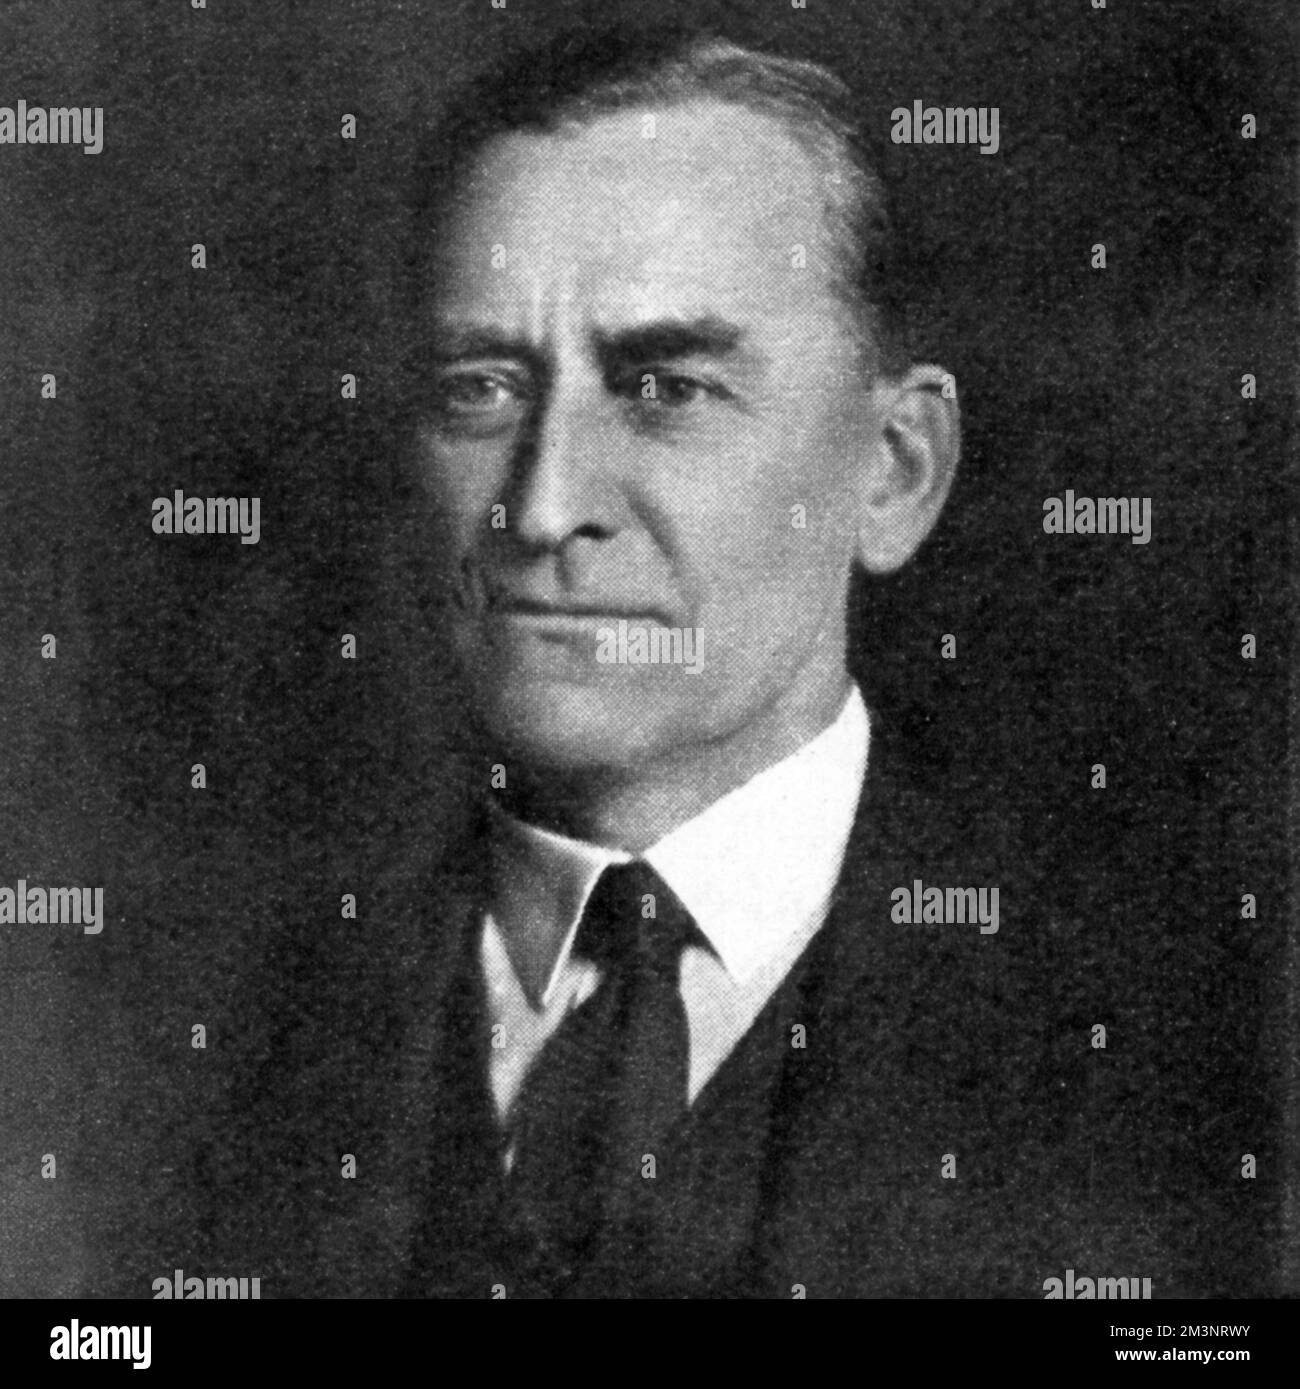 Sir John Marshall, Director-General of Archaeology in India from 1902 to 1931. He was responsible for the excavations in the Indus Valley which discovered Harappa and Mohenjodaro     Date: 1958 Stock Photo